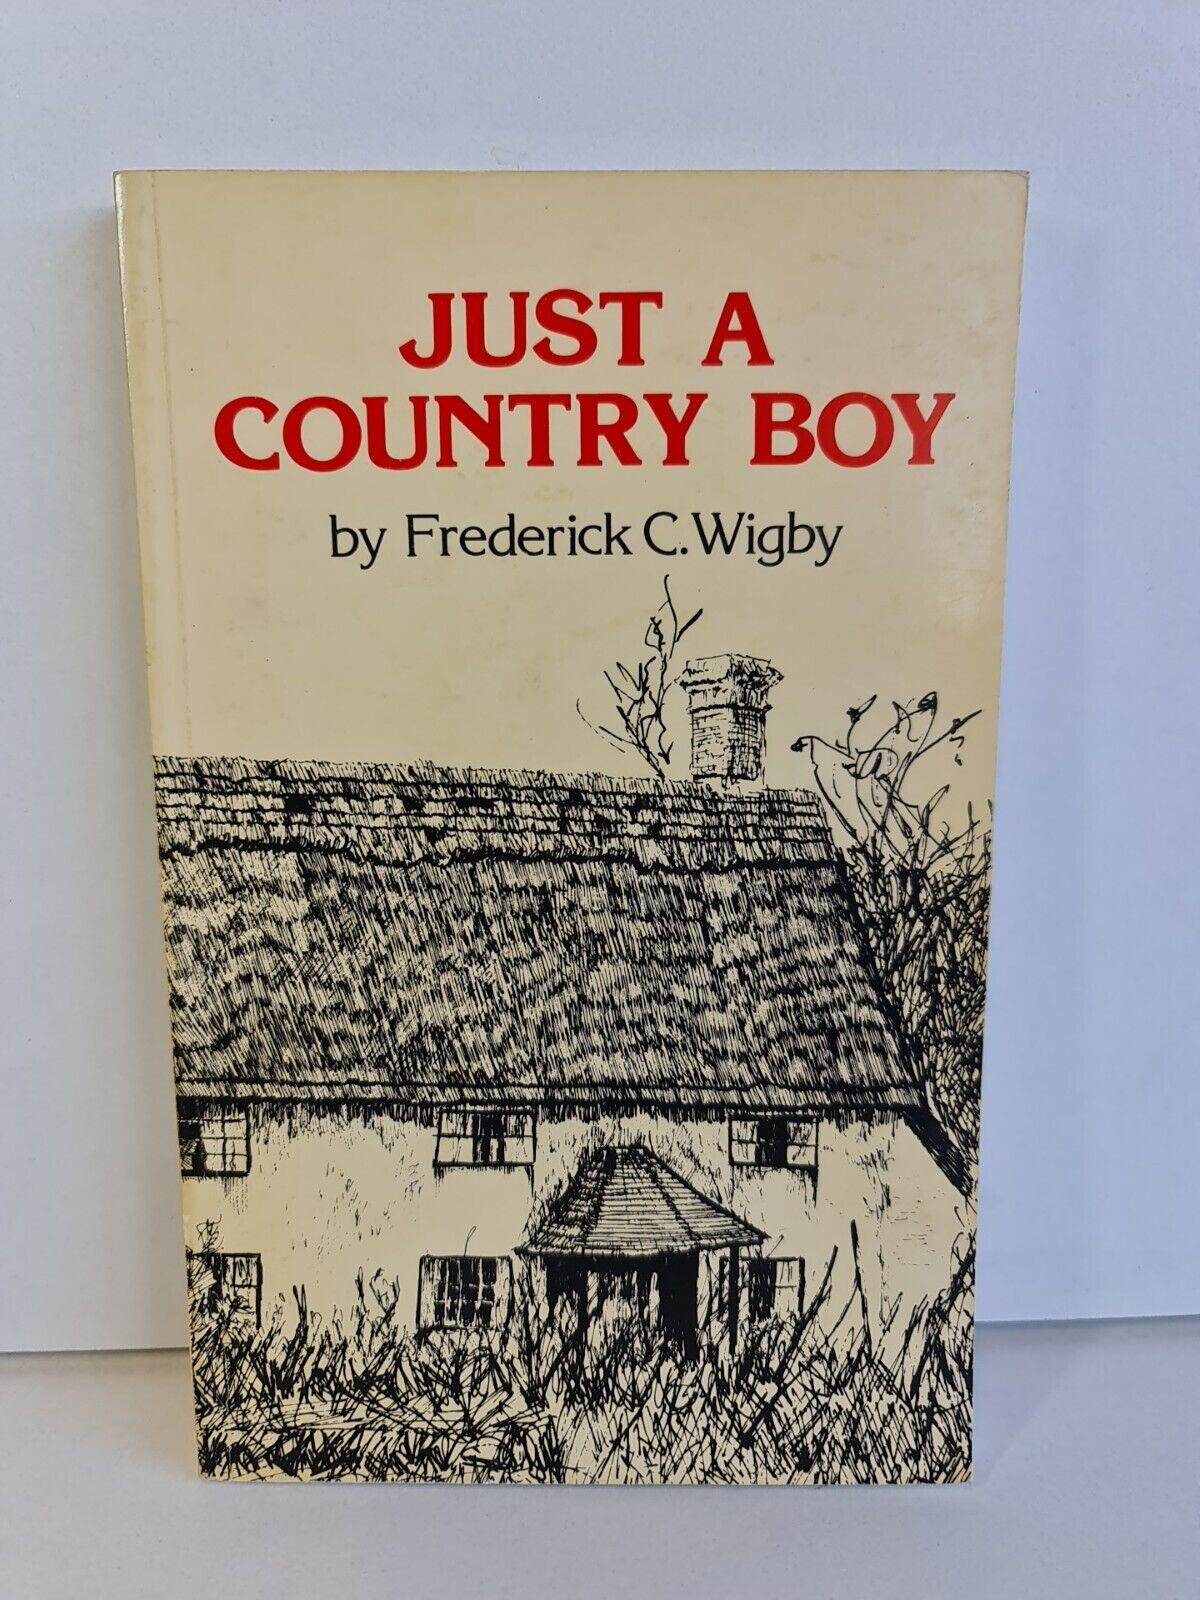 Just A Country Boy by Frederick Wigby (1984)